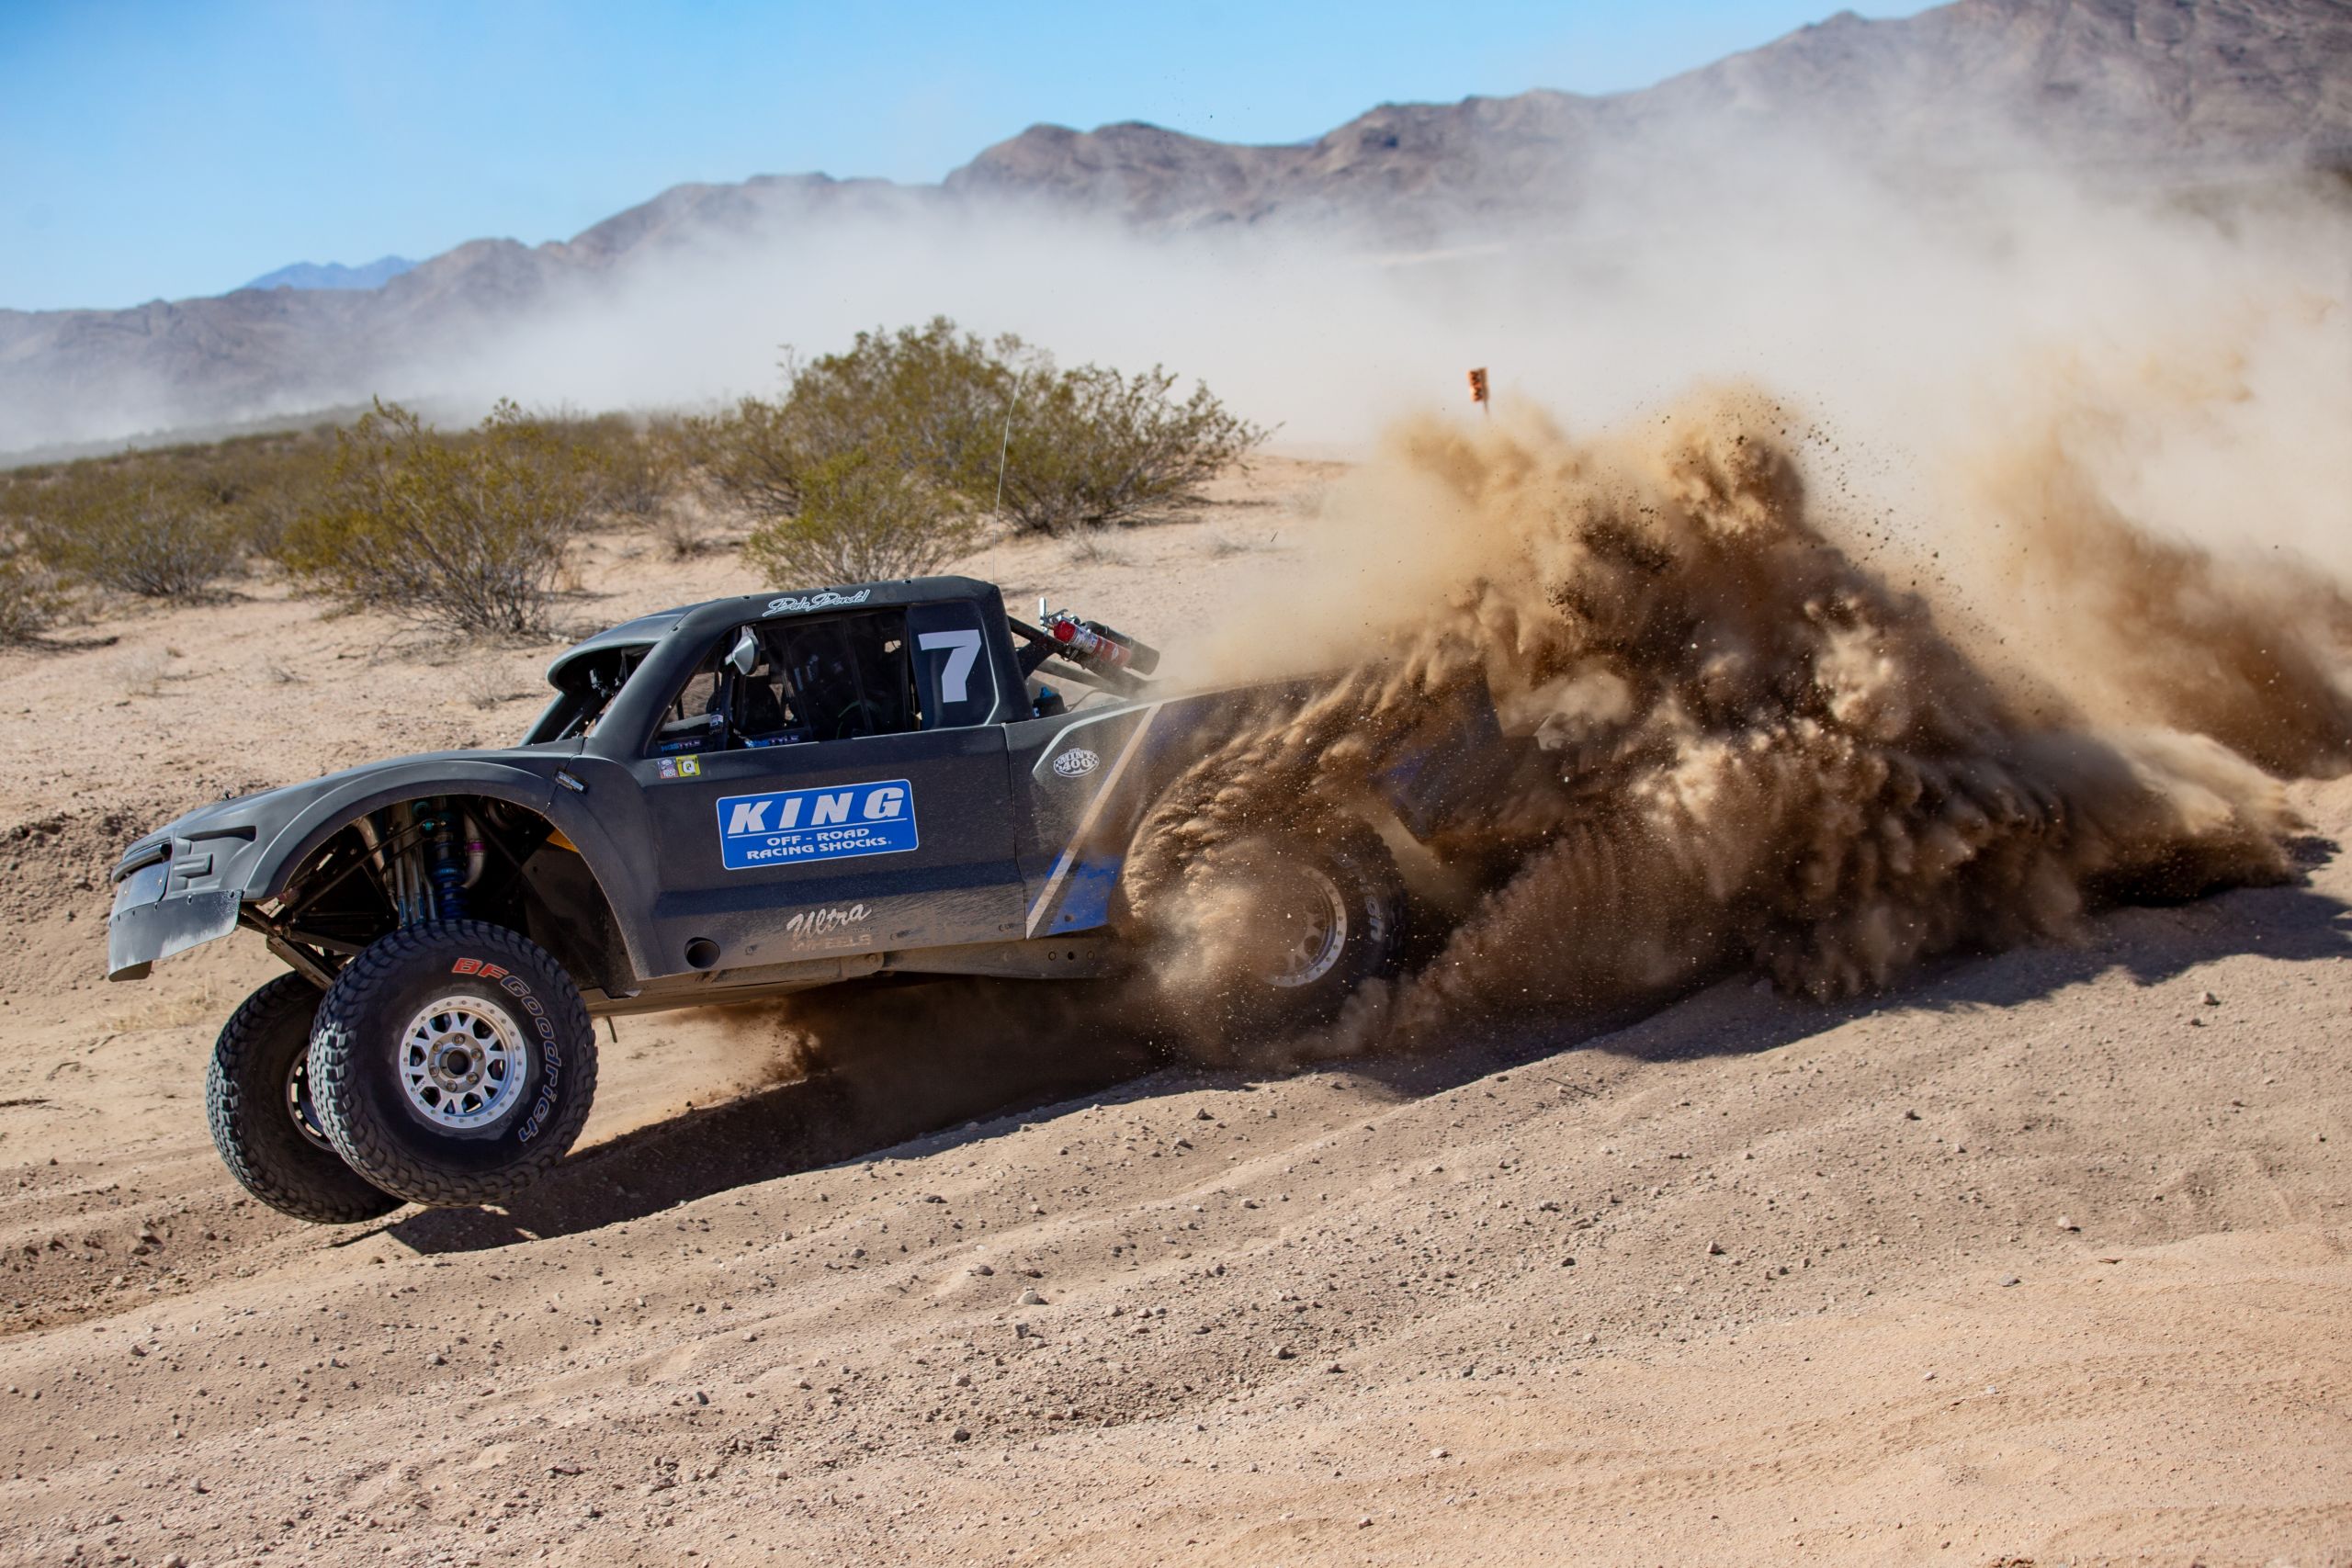 The 2022 California 300 offroad race debuts in Barstow, CA, October